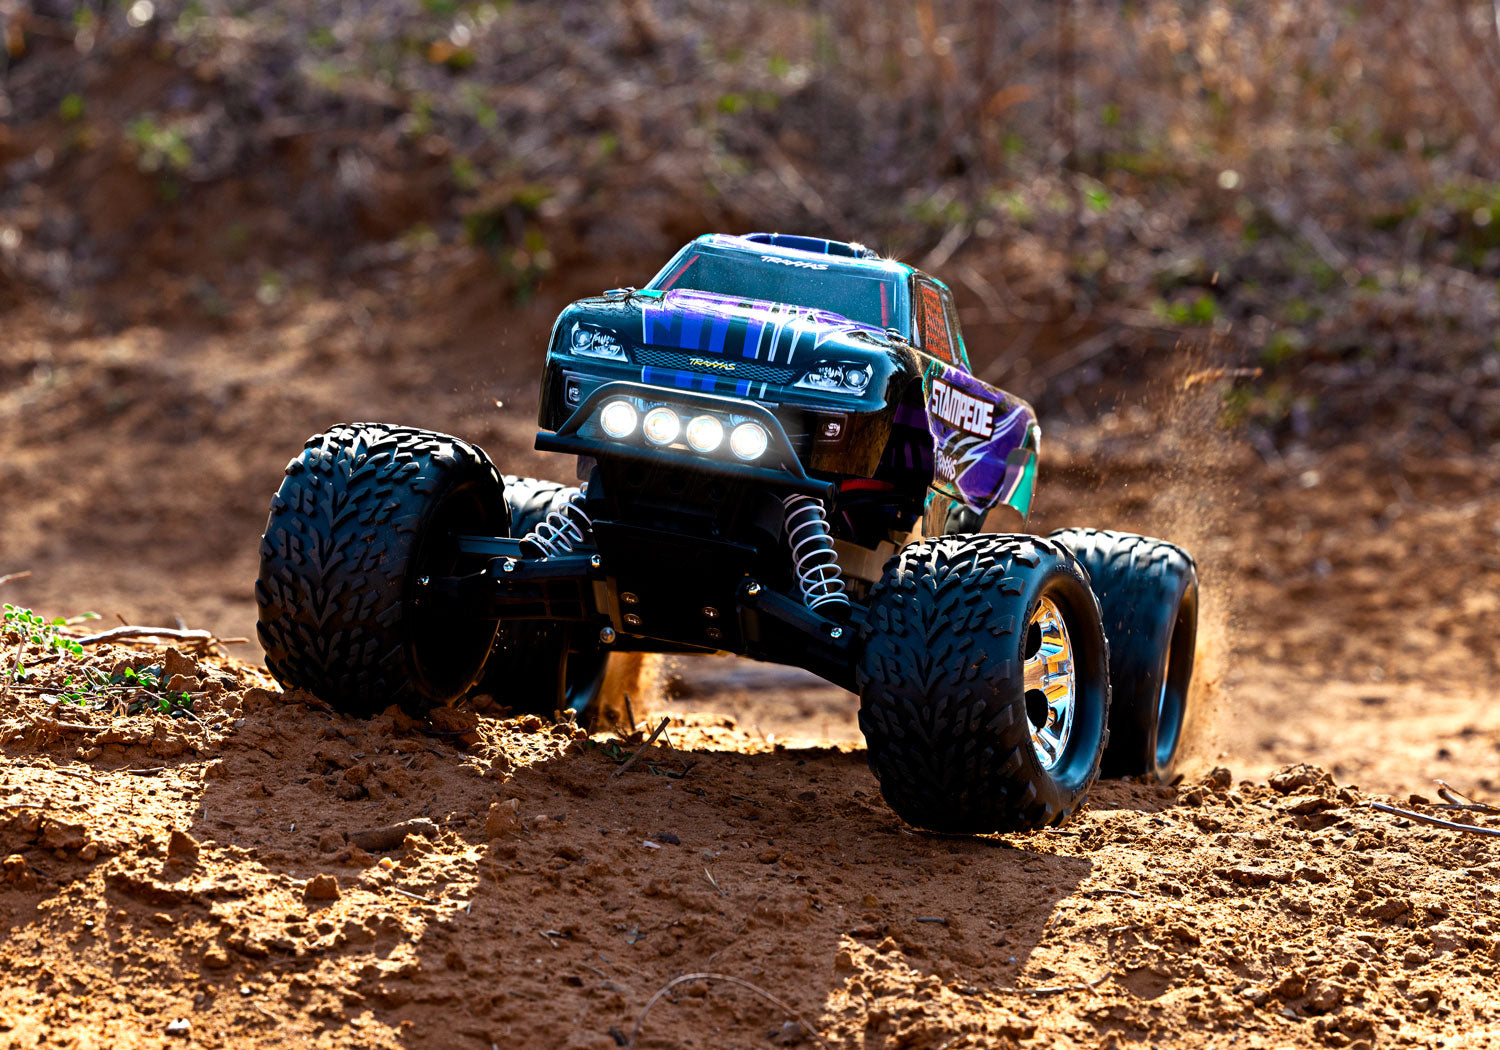 Traxxas Stampede 2wd 1/10 RTR Monster Truck con juego de luces LED